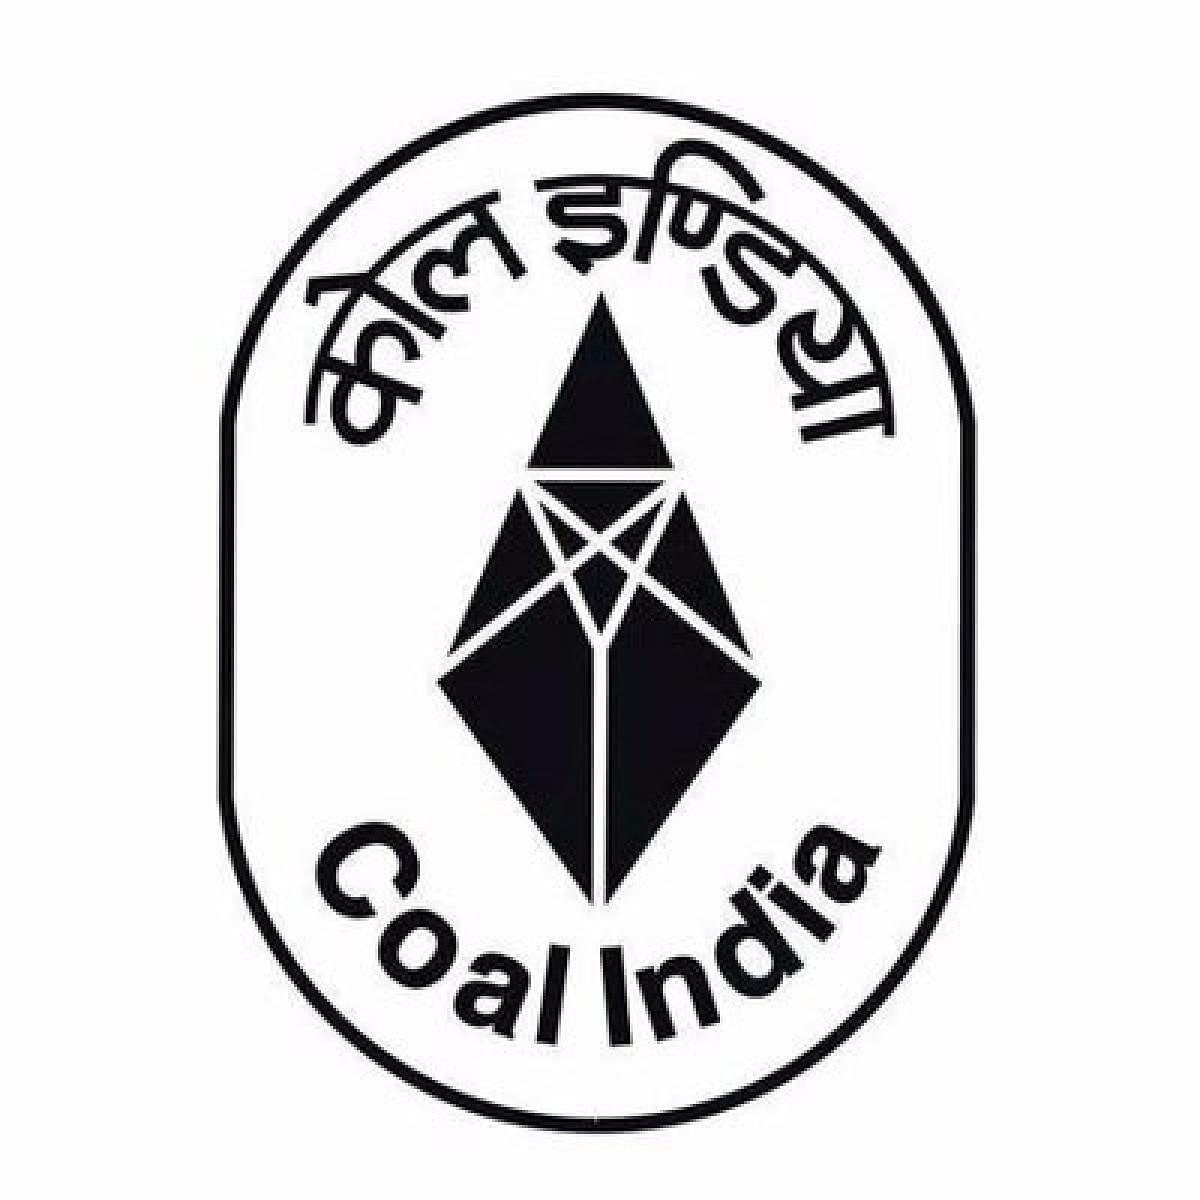 Coal India to convert redeemable preference shares held in BCCL into equity